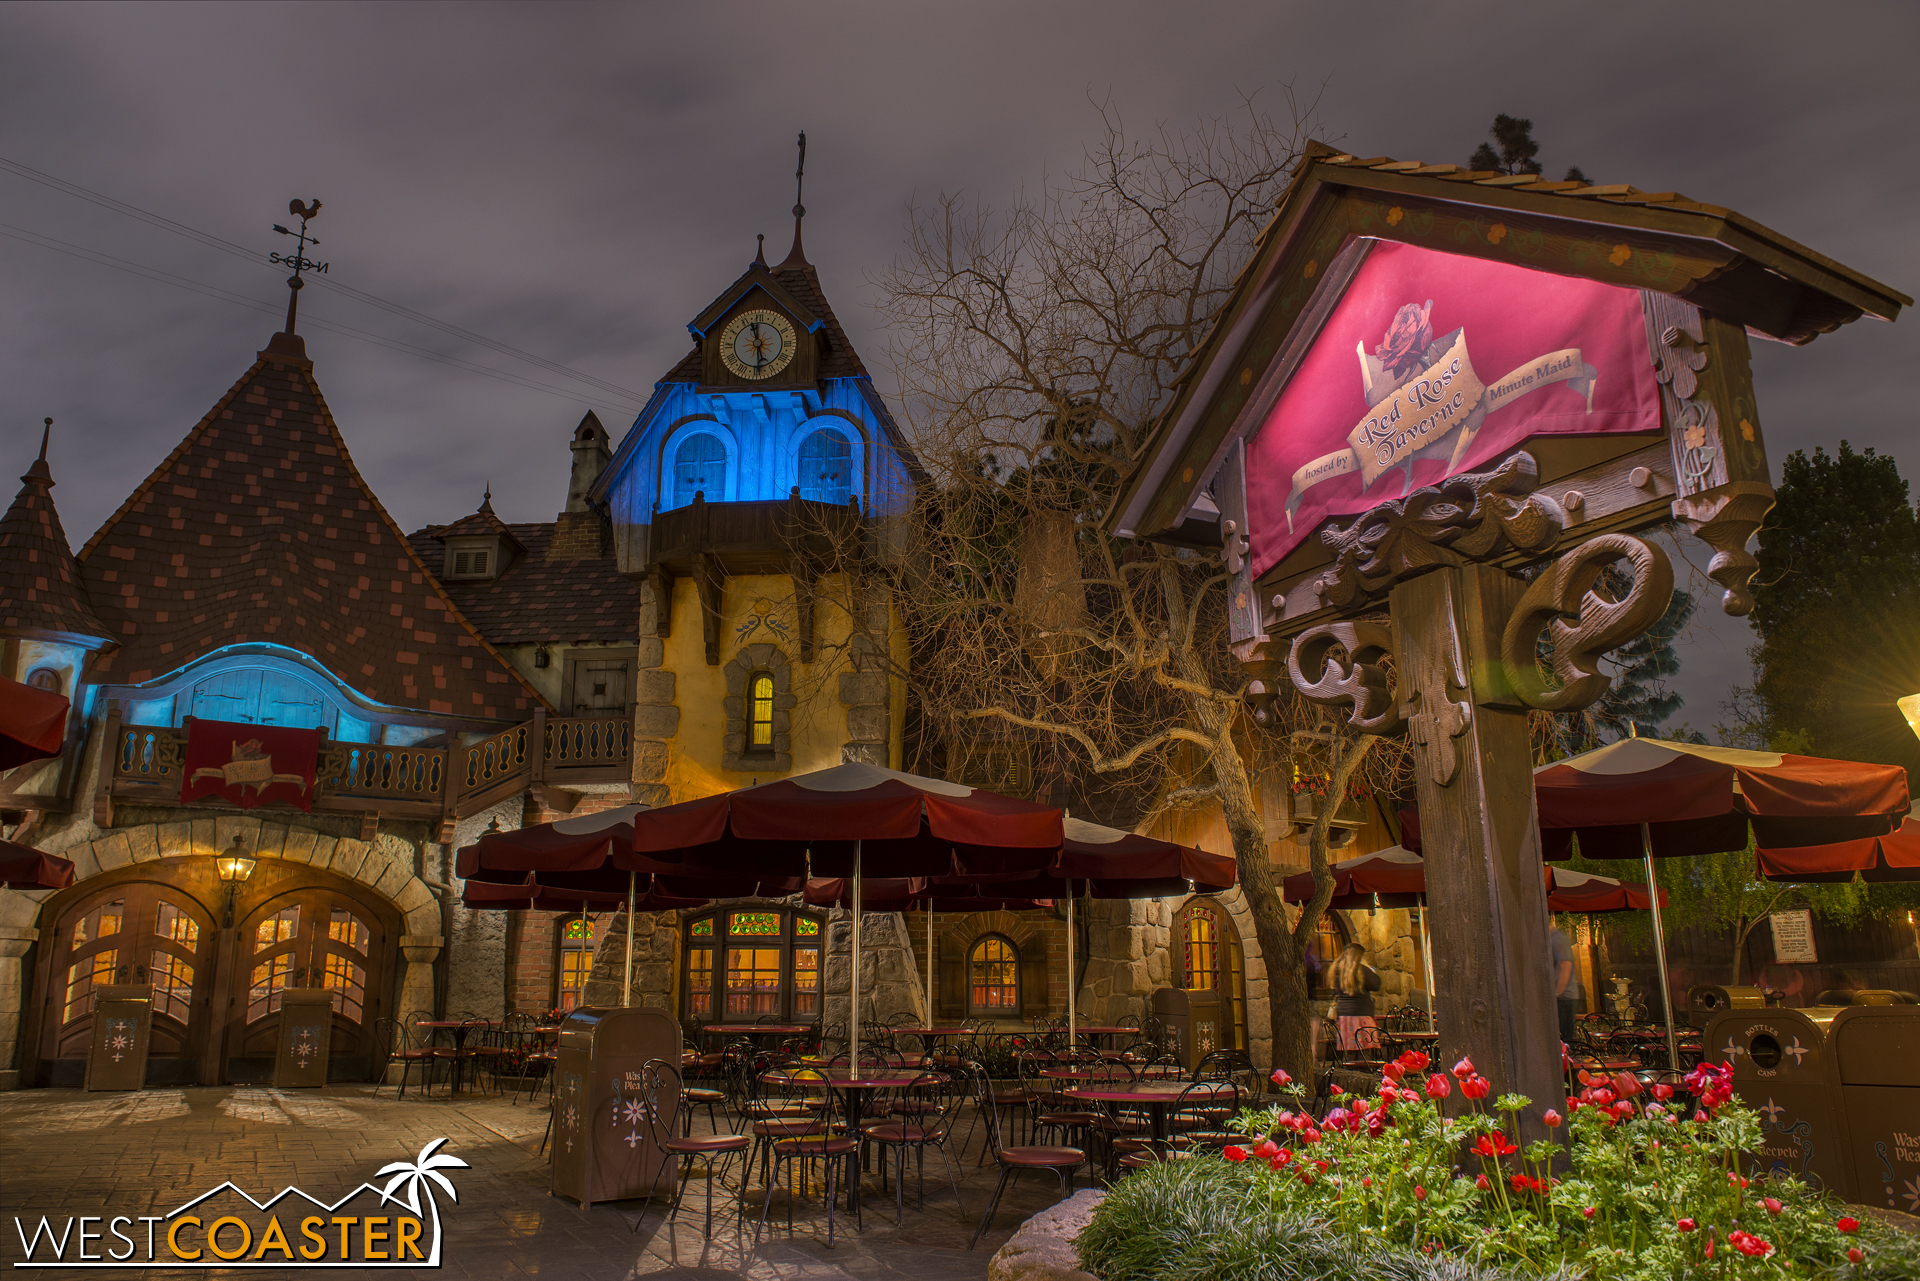  There's no word on exactly how long this will run, but a couple of cast members offered "a few months" as the anticipated timeline.&nbsp; Hopefully, some of the menu items make it onto the permanent rotation after this limited time experience ends! 